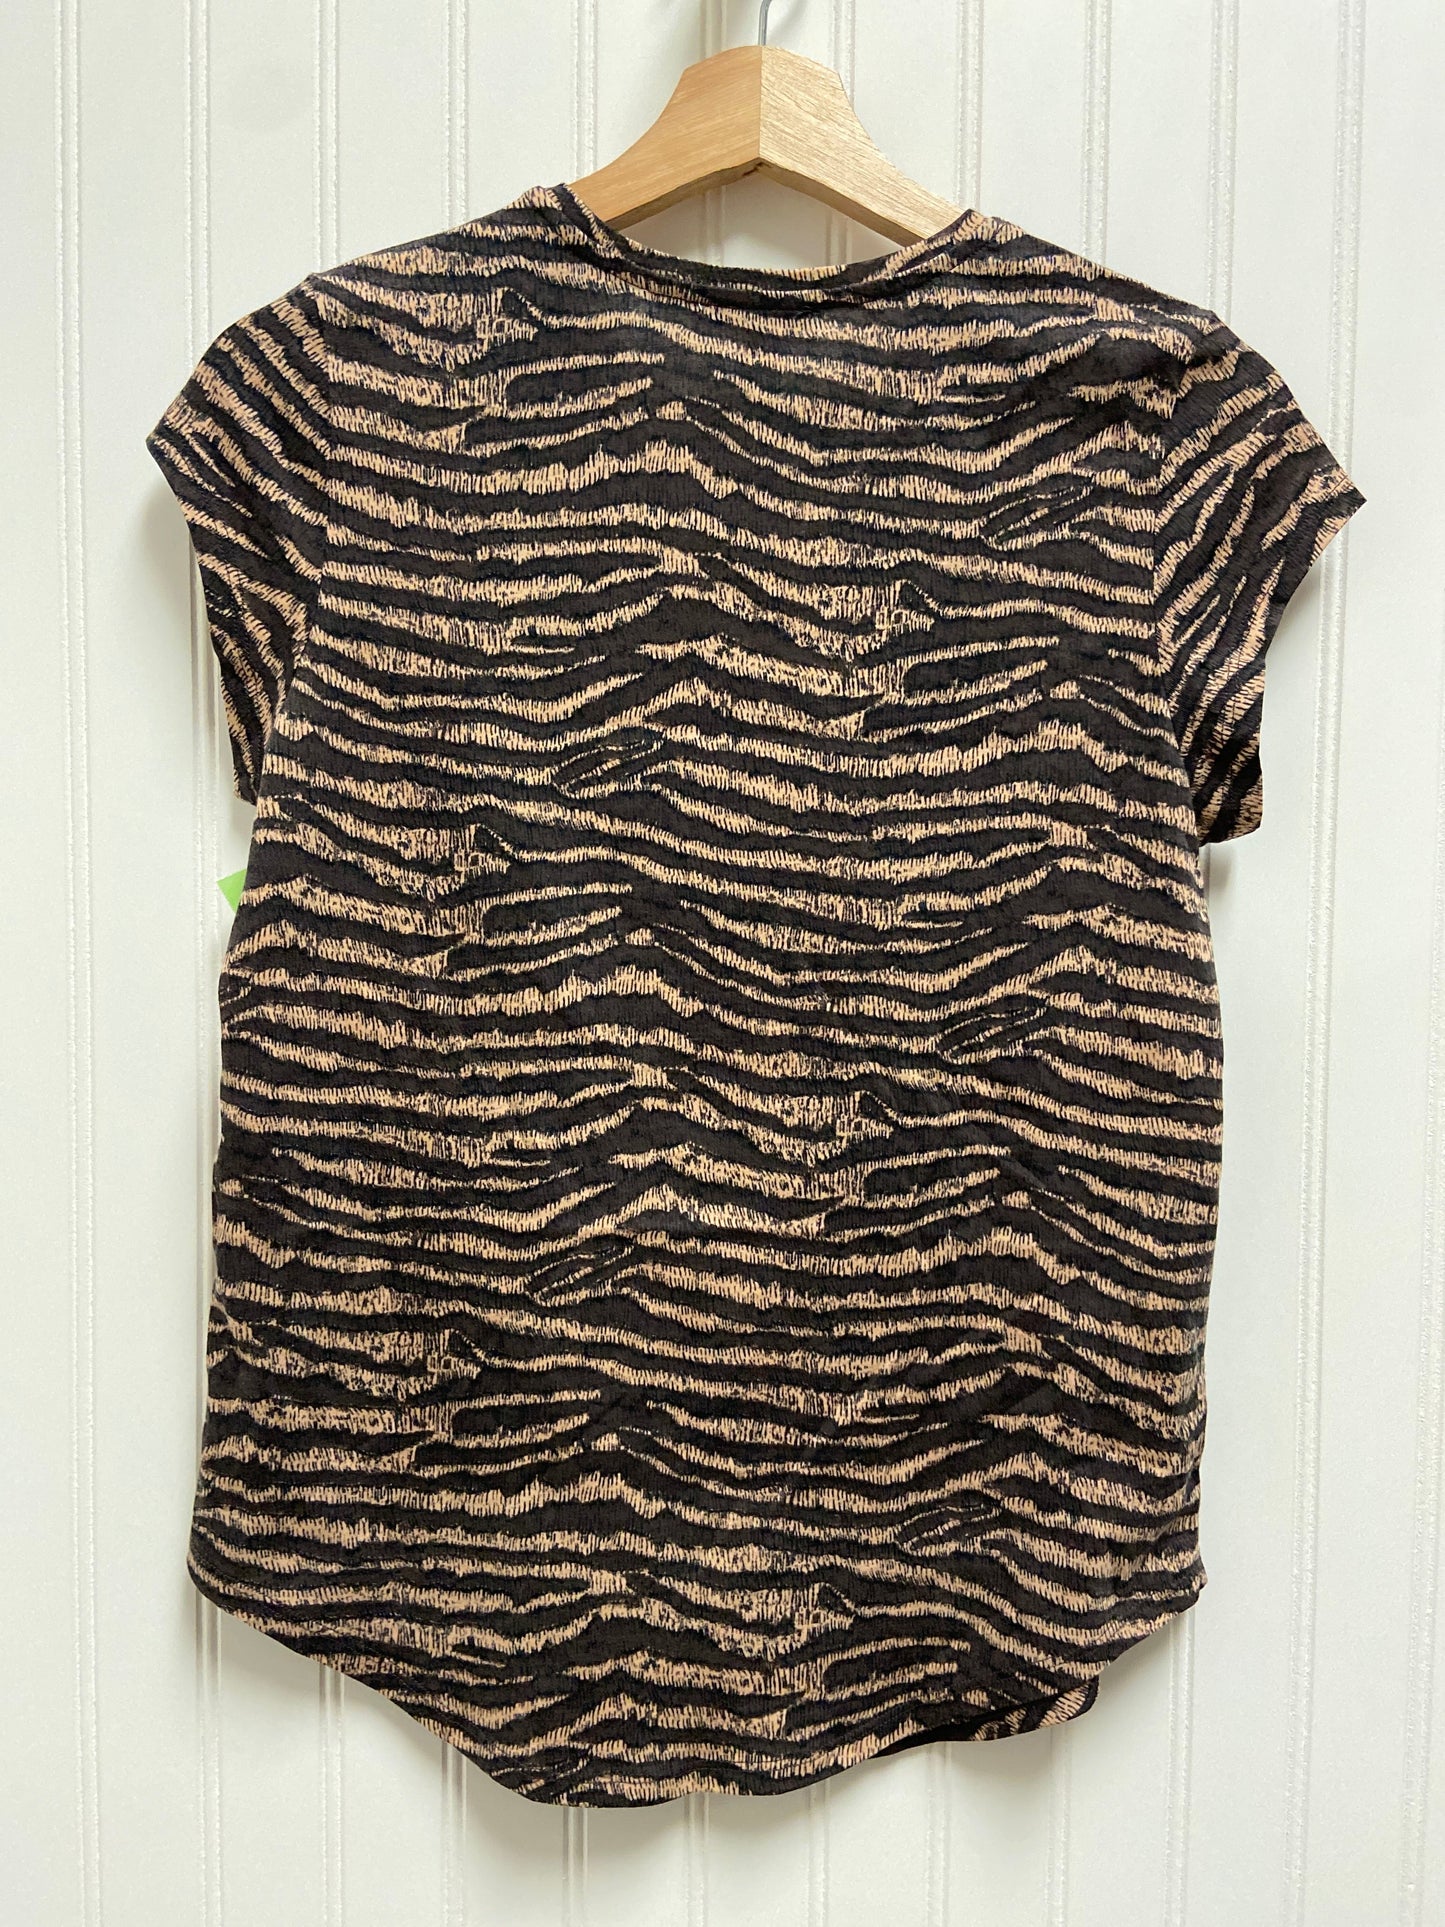 Top Short Sleeve Basic By Joie  Size: Xs